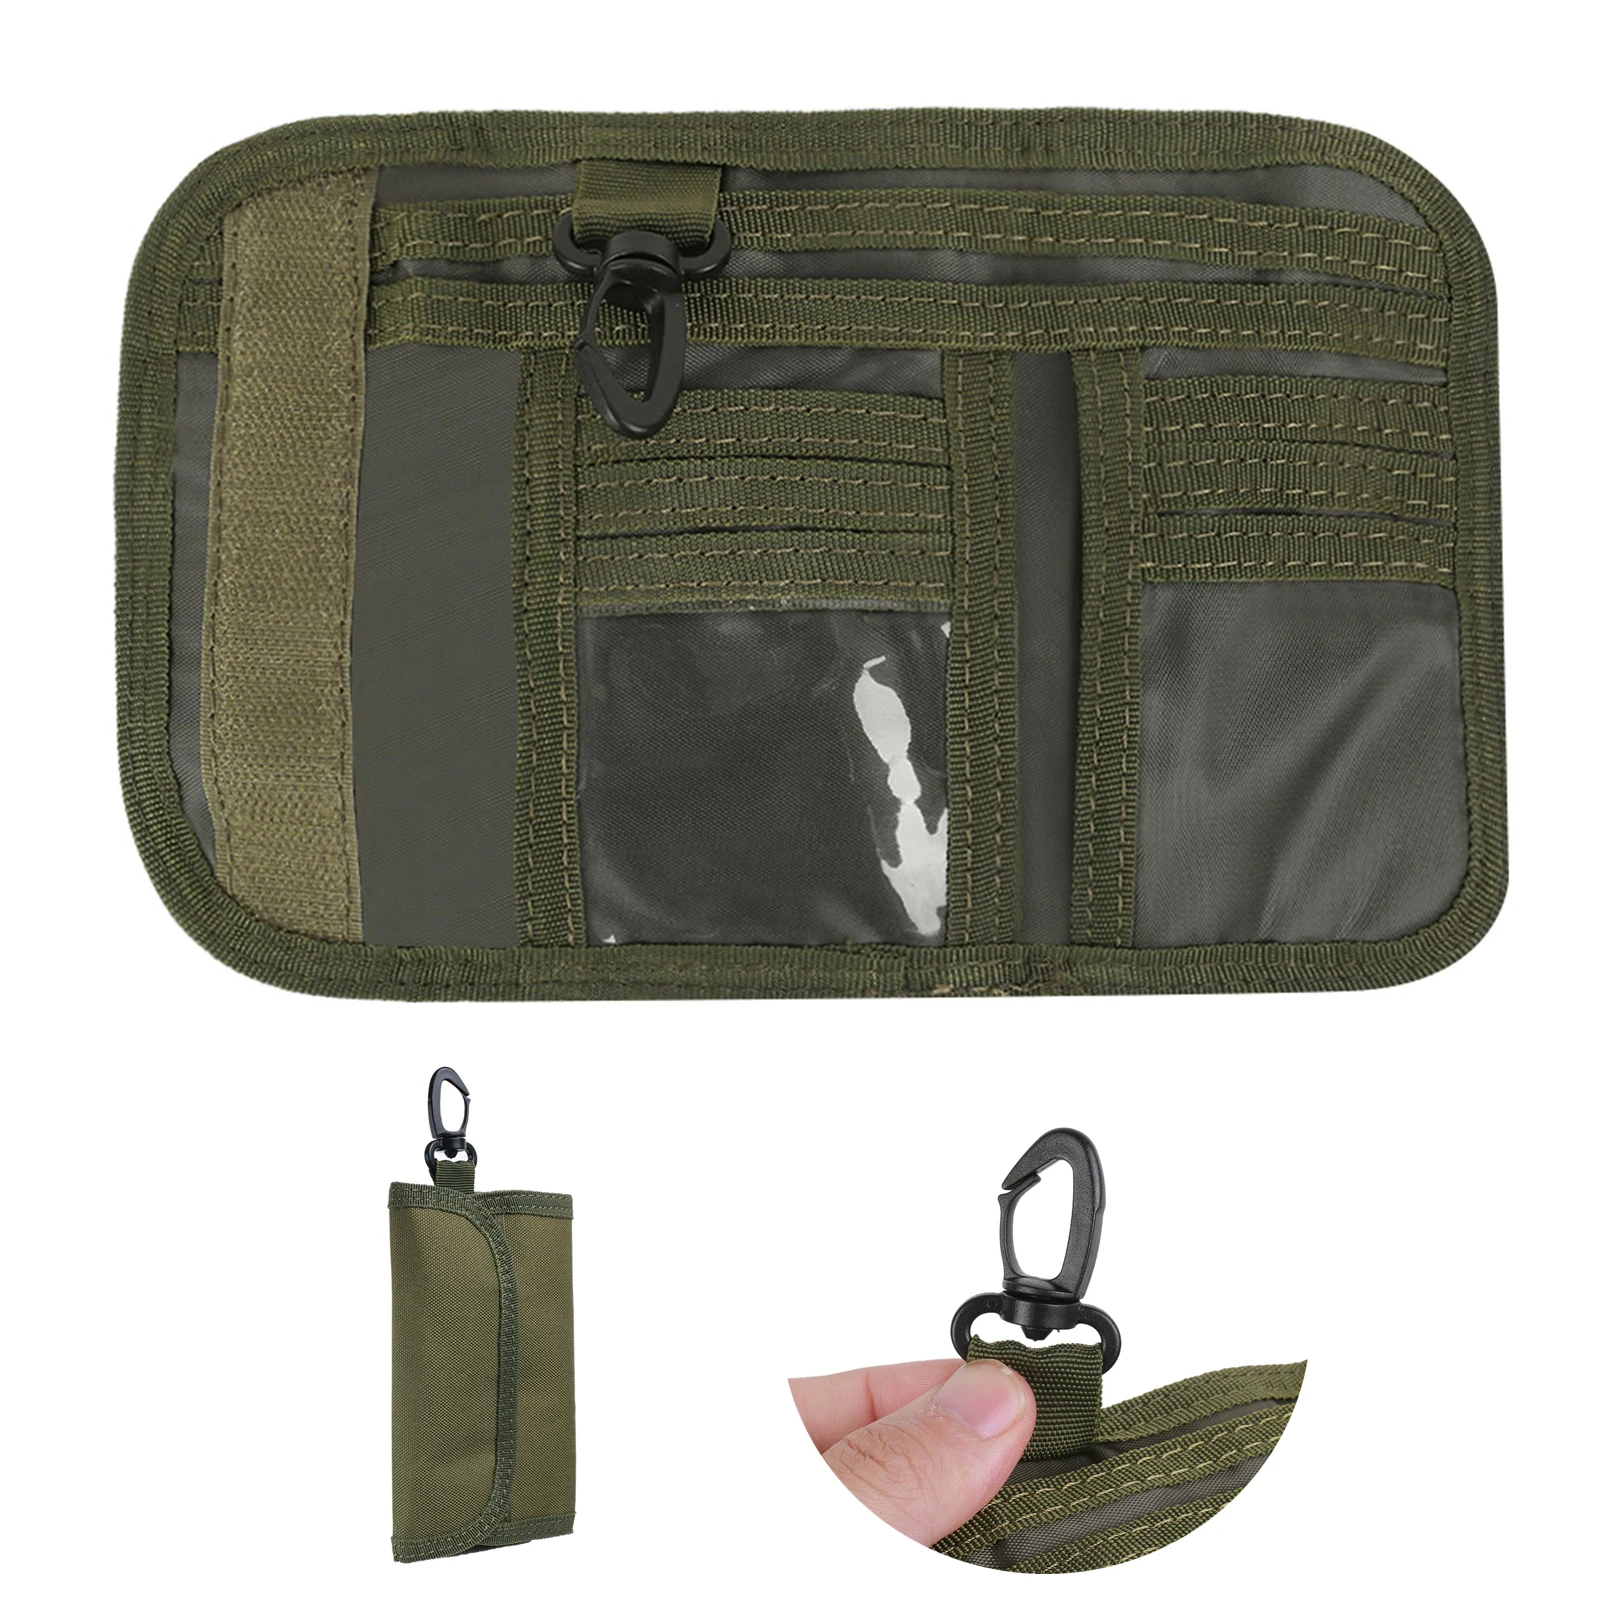 600D Tactical Portable Wallet Waist Pack Bag EDC Money Card Pouch Trifold Wallets Outdoor Sports Purse Mens Military Holder